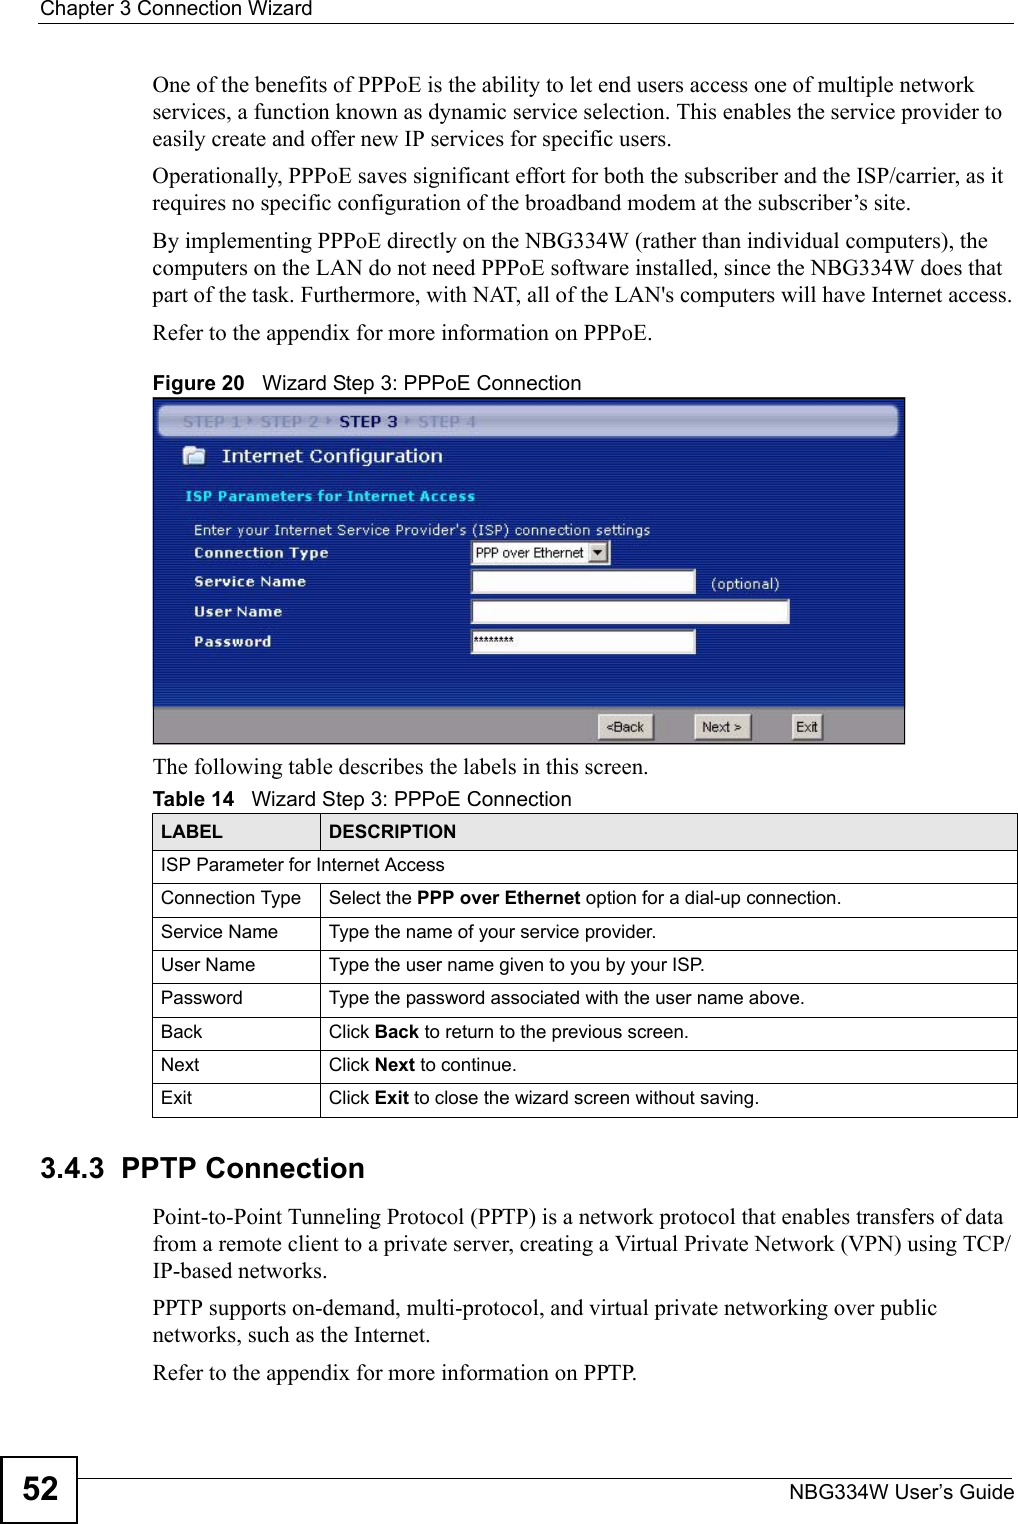 Chapter 3 Connection WizardNBG334W User’s Guide52One of the benefits of PPPoE is the ability to let end users access one of multiple network services, a function known as dynamic service selection. This enables the service provider to easily create and offer new IP services for specific users.Operationally, PPPoE saves significant effort for both the subscriber and the ISP/carrier, as it requires no specific configuration of the broadband modem at the subscriber’s site.By implementing PPPoE directly on the NBG334W (rather than individual computers), the computers on the LAN do not need PPPoE software installed, since the NBG334W does that part of the task. Furthermore, with NAT, all of the LAN&apos;s computers will have Internet access.Refer to the appendix for more information on PPPoE.Figure 20   Wizard Step 3: PPPoE ConnectionThe following table describes the labels in this screen.3.4.3  PPTP ConnectionPoint-to-Point Tunneling Protocol (PPTP) is a network protocol that enables transfers of data from a remote client to a private server, creating a Virtual Private Network (VPN) using TCP/IP-based networks.PPTP supports on-demand, multi-protocol, and virtual private networking over public networks, such as the Internet.Refer to the appendix for more information on PPTP.Table 14   Wizard Step 3: PPPoE ConnectionLABEL DESCRIPTIONISP Parameter for Internet AccessConnection Type Select the PPP over Ethernet option for a dial-up connection.Service Name  Type the name of your service provider.User Name Type the user name given to you by your ISP. Password  Type the password associated with the user name above.Back Click Back to return to the previous screen. Next Click Next to continue. Exit Click Exit to close the wizard screen without saving.